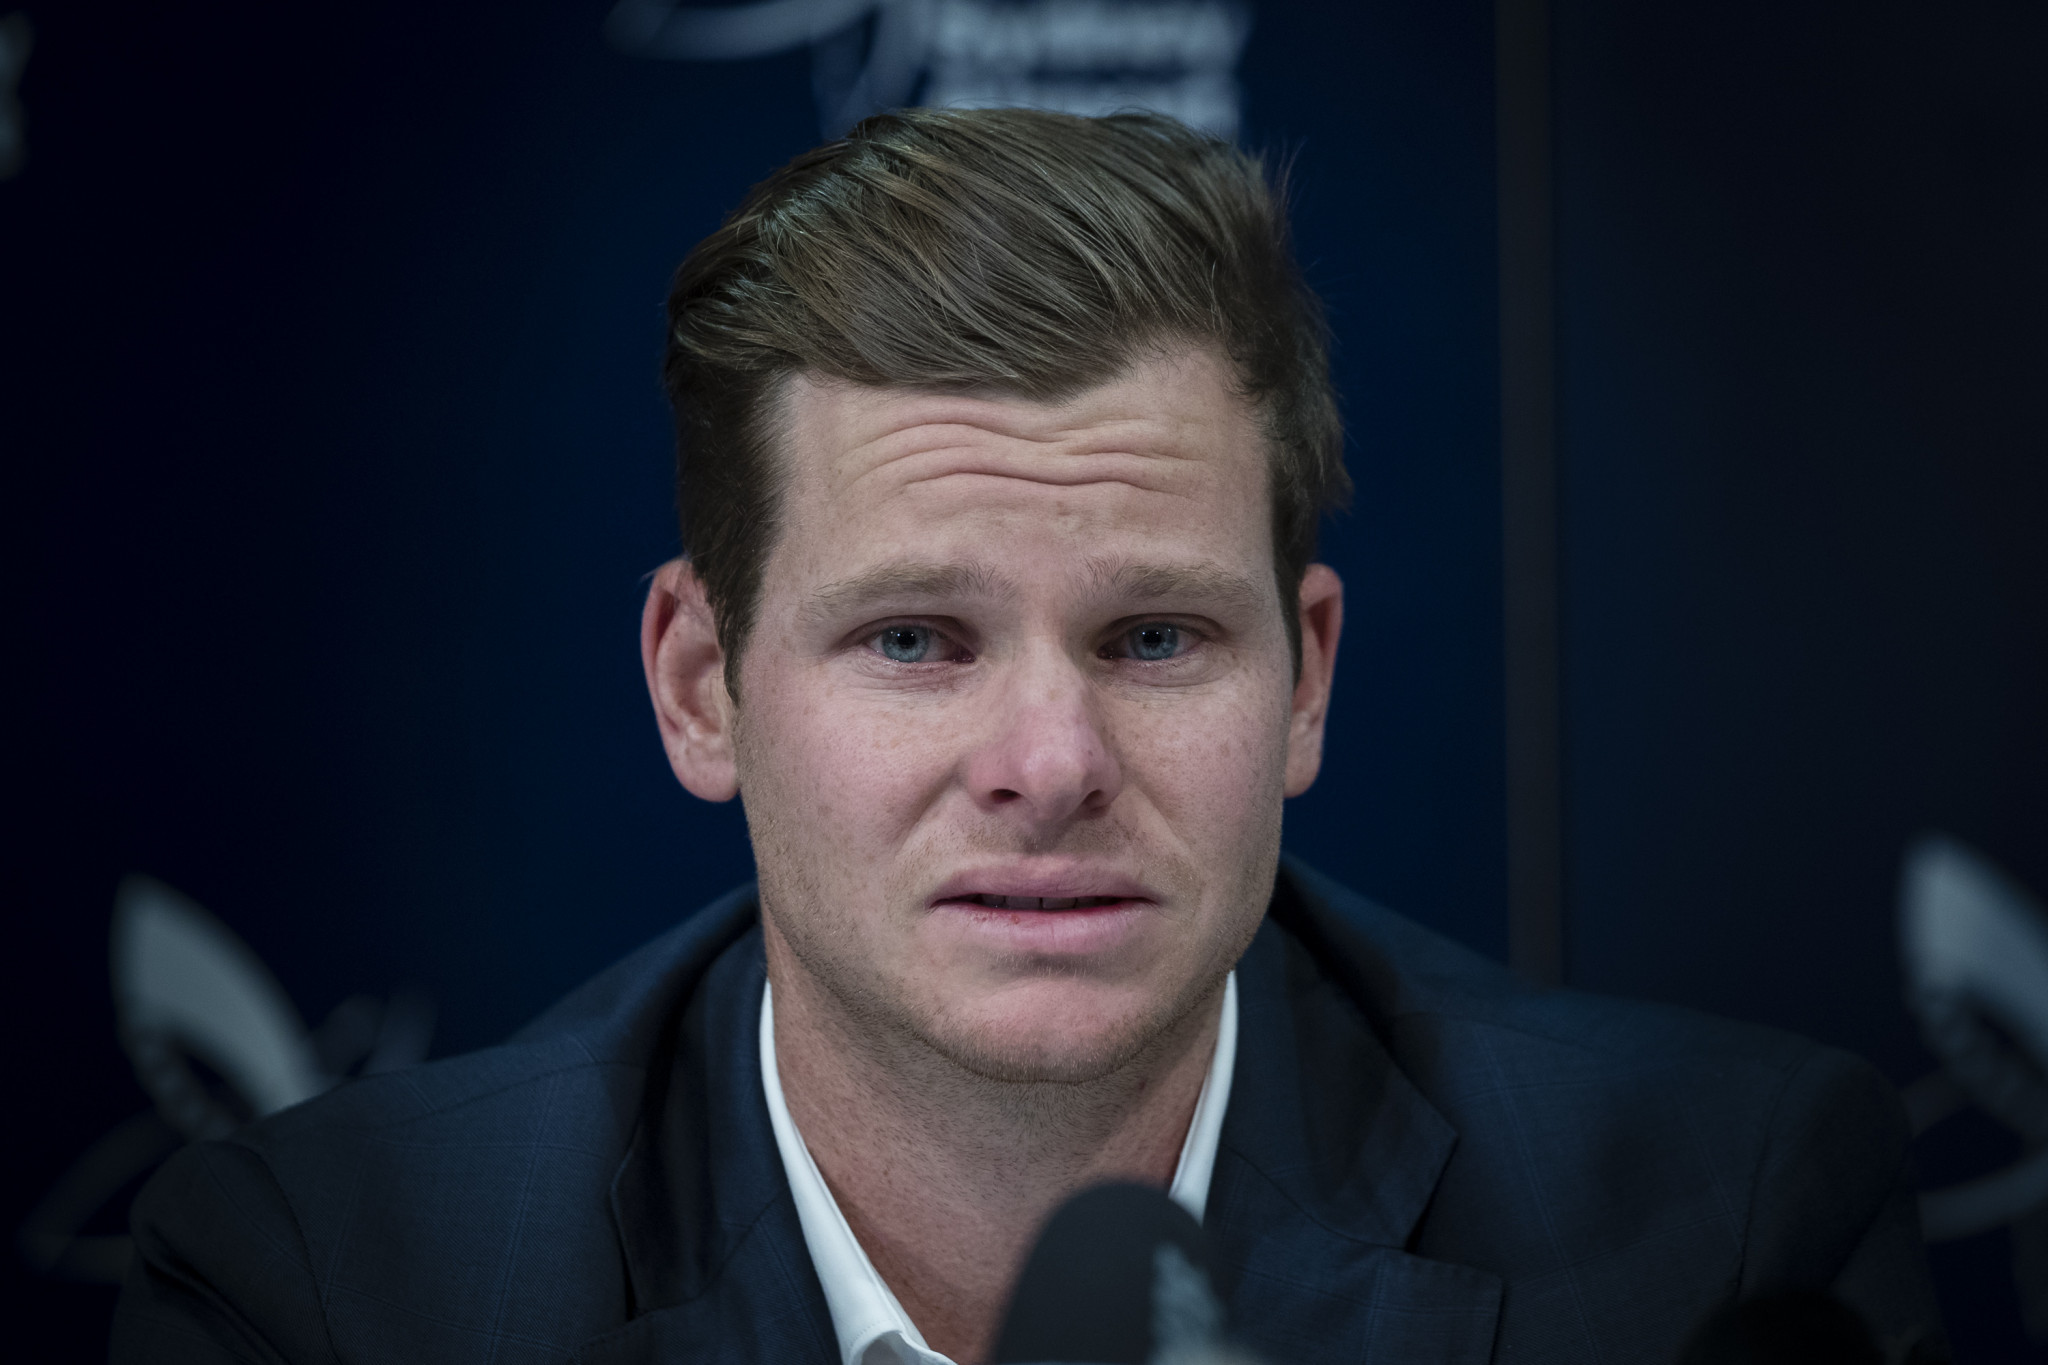 An Ethics Centre report has found that Cricket Australia are "partly to blame" for the ball tampering scandal which saw Australia captain Steve Smith suspended, as well as vice-captain David Warner and batsman Cameron Bancroft ©Getty Images 